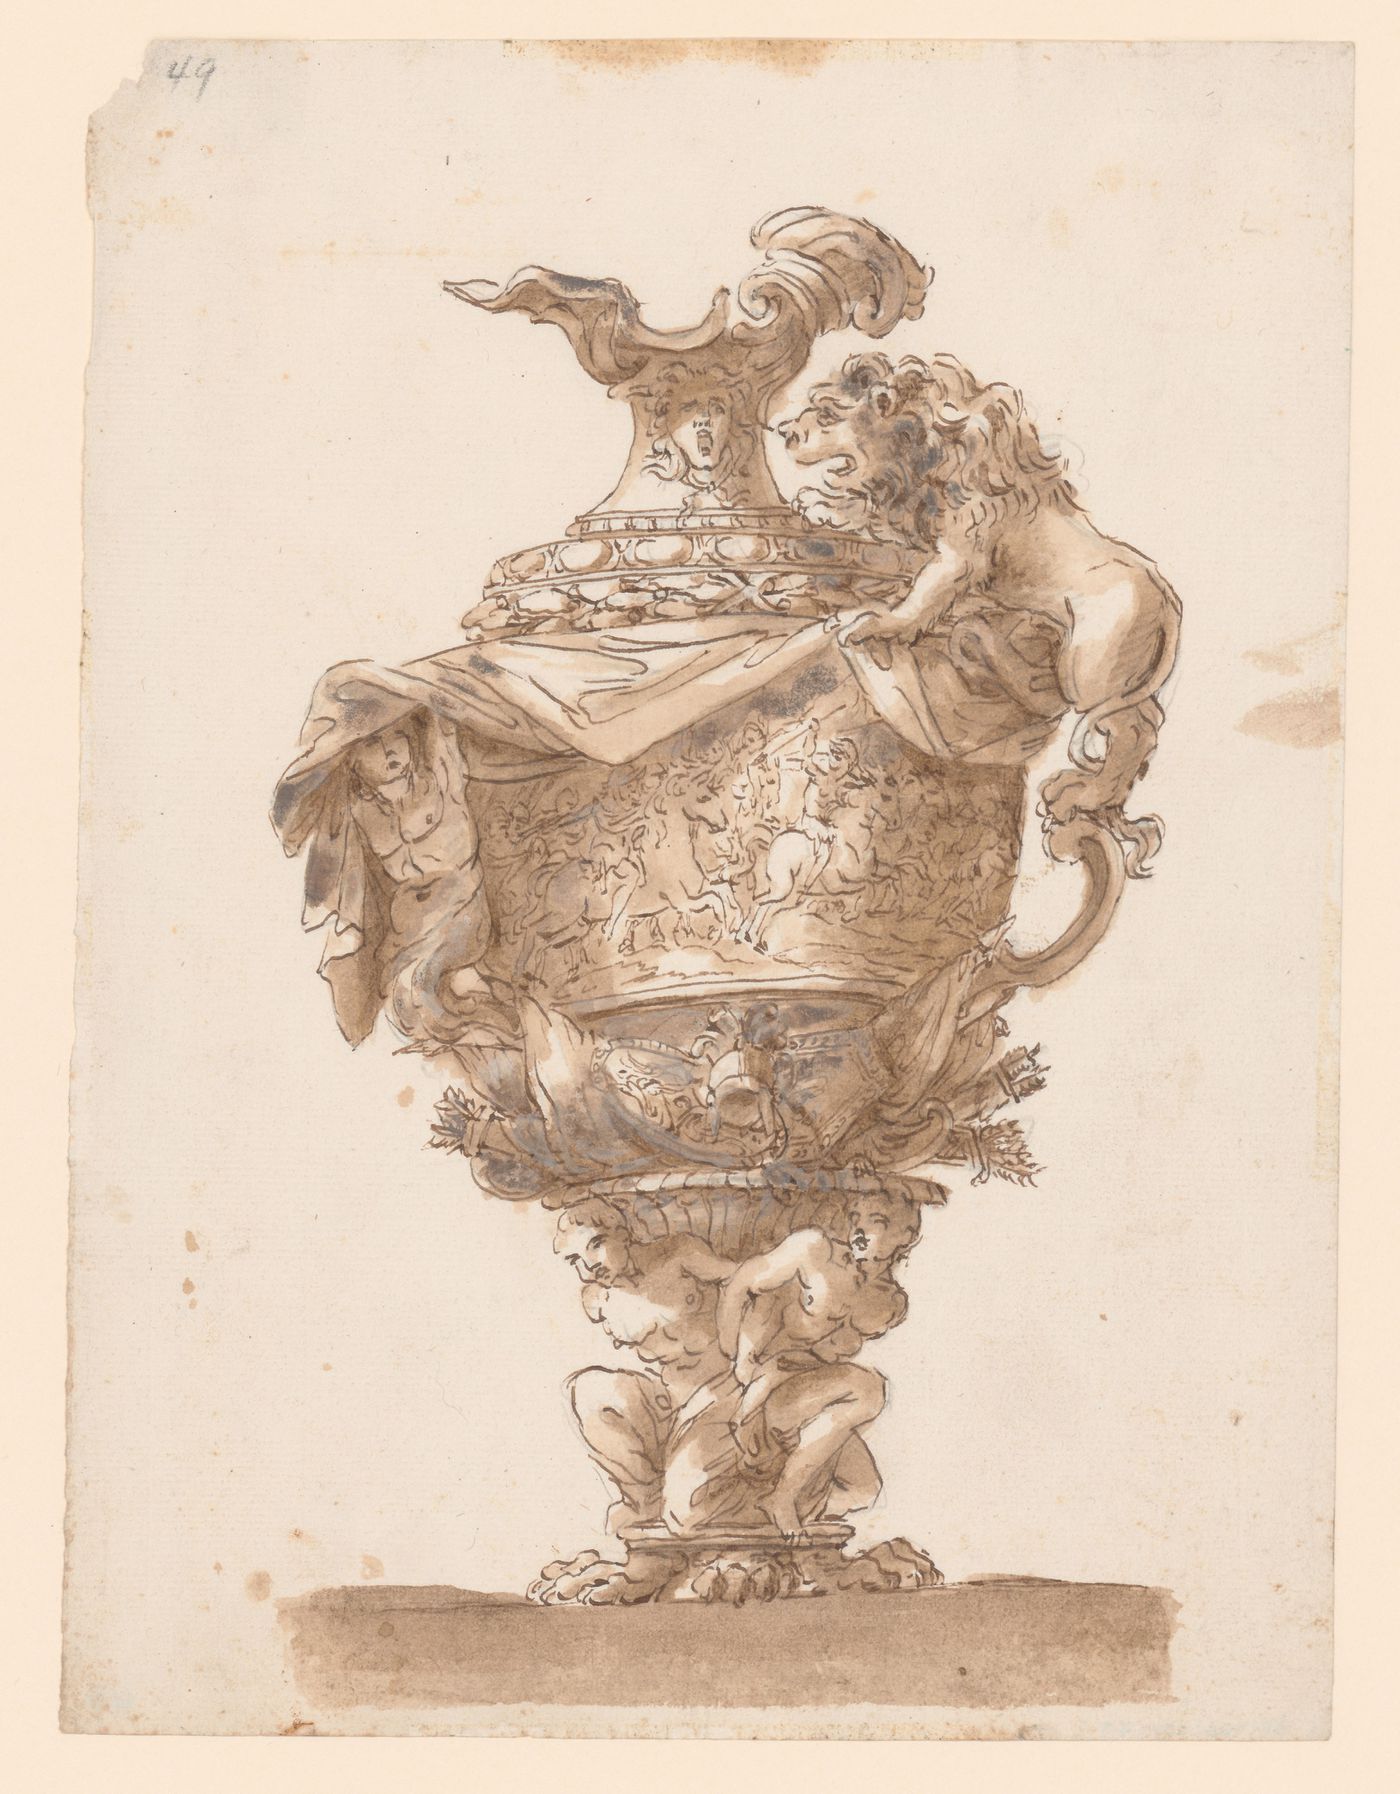 Design for an ornamental vase with battle scene, martial trophy, captives, and a handle in the form of a lion